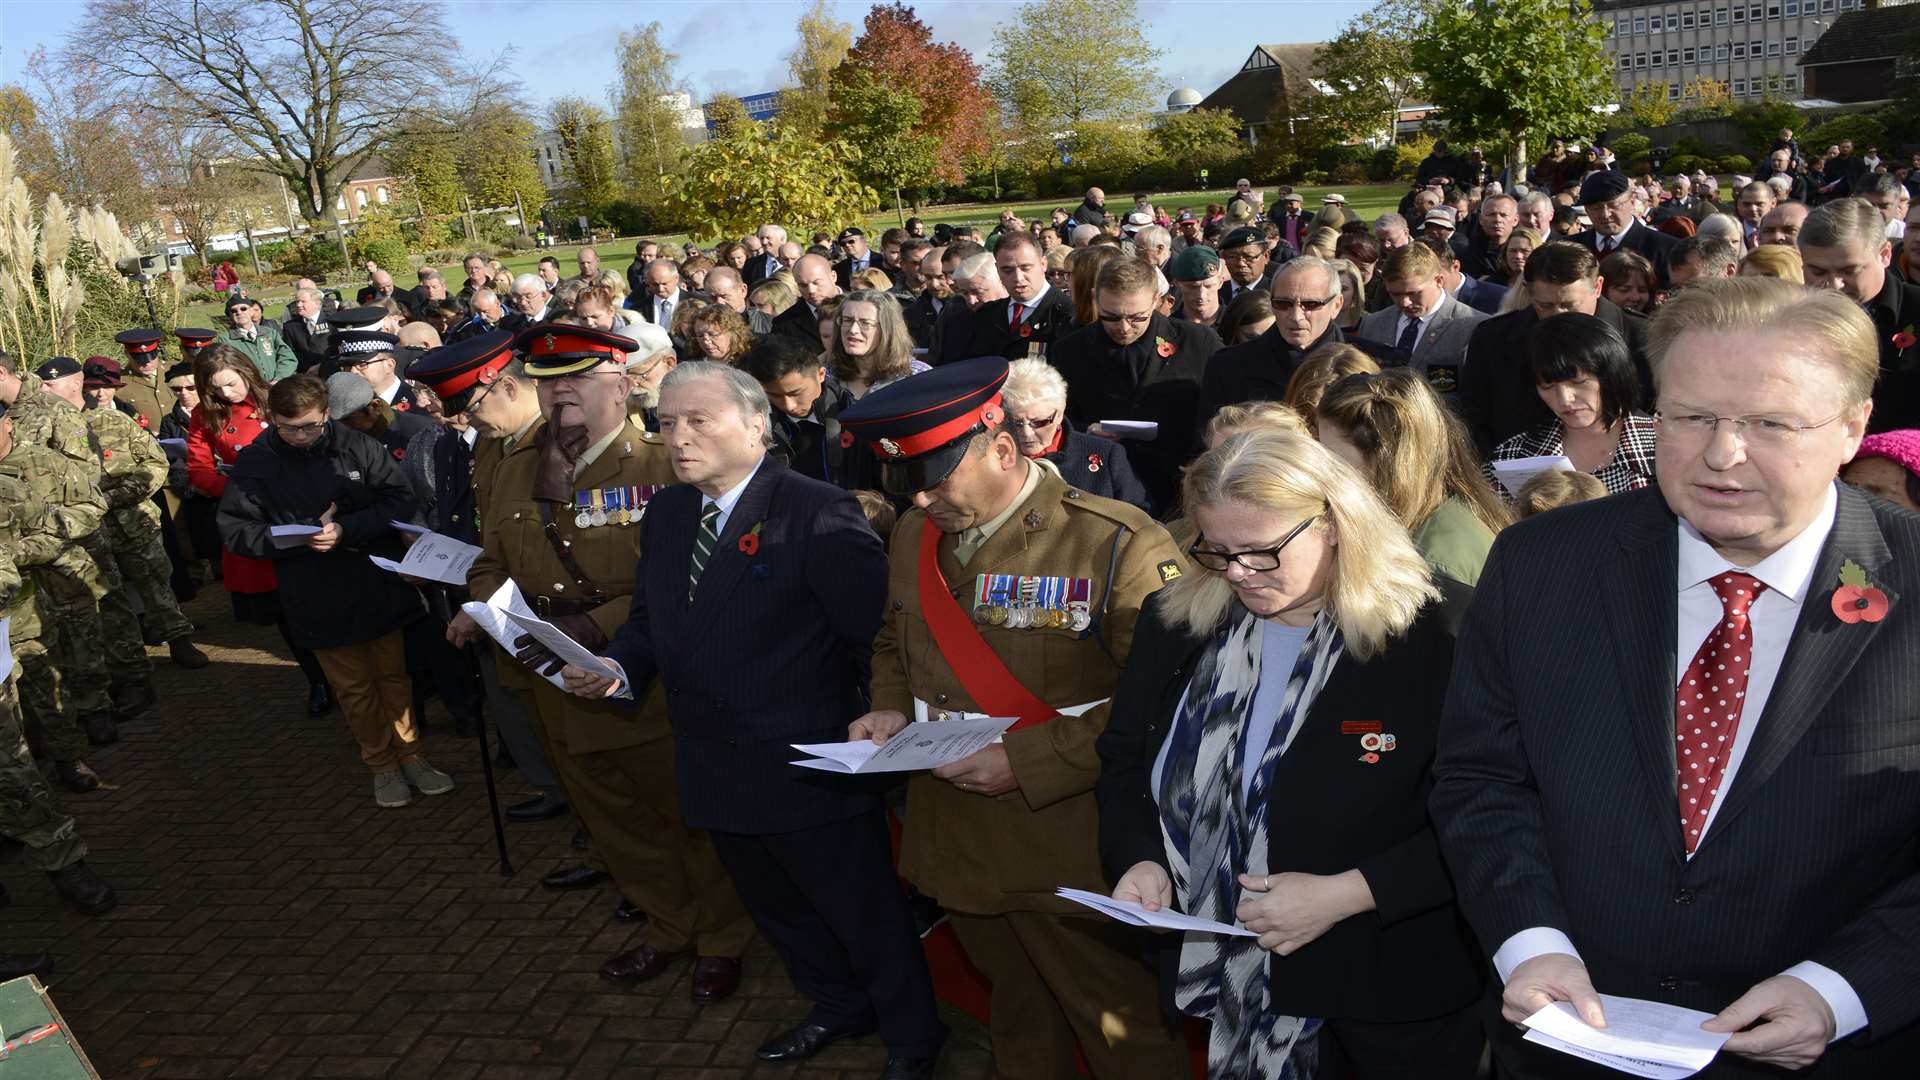 Hundreds gathered in the neighbouring Memorial Gardens for the Remembrance Sunday service in November